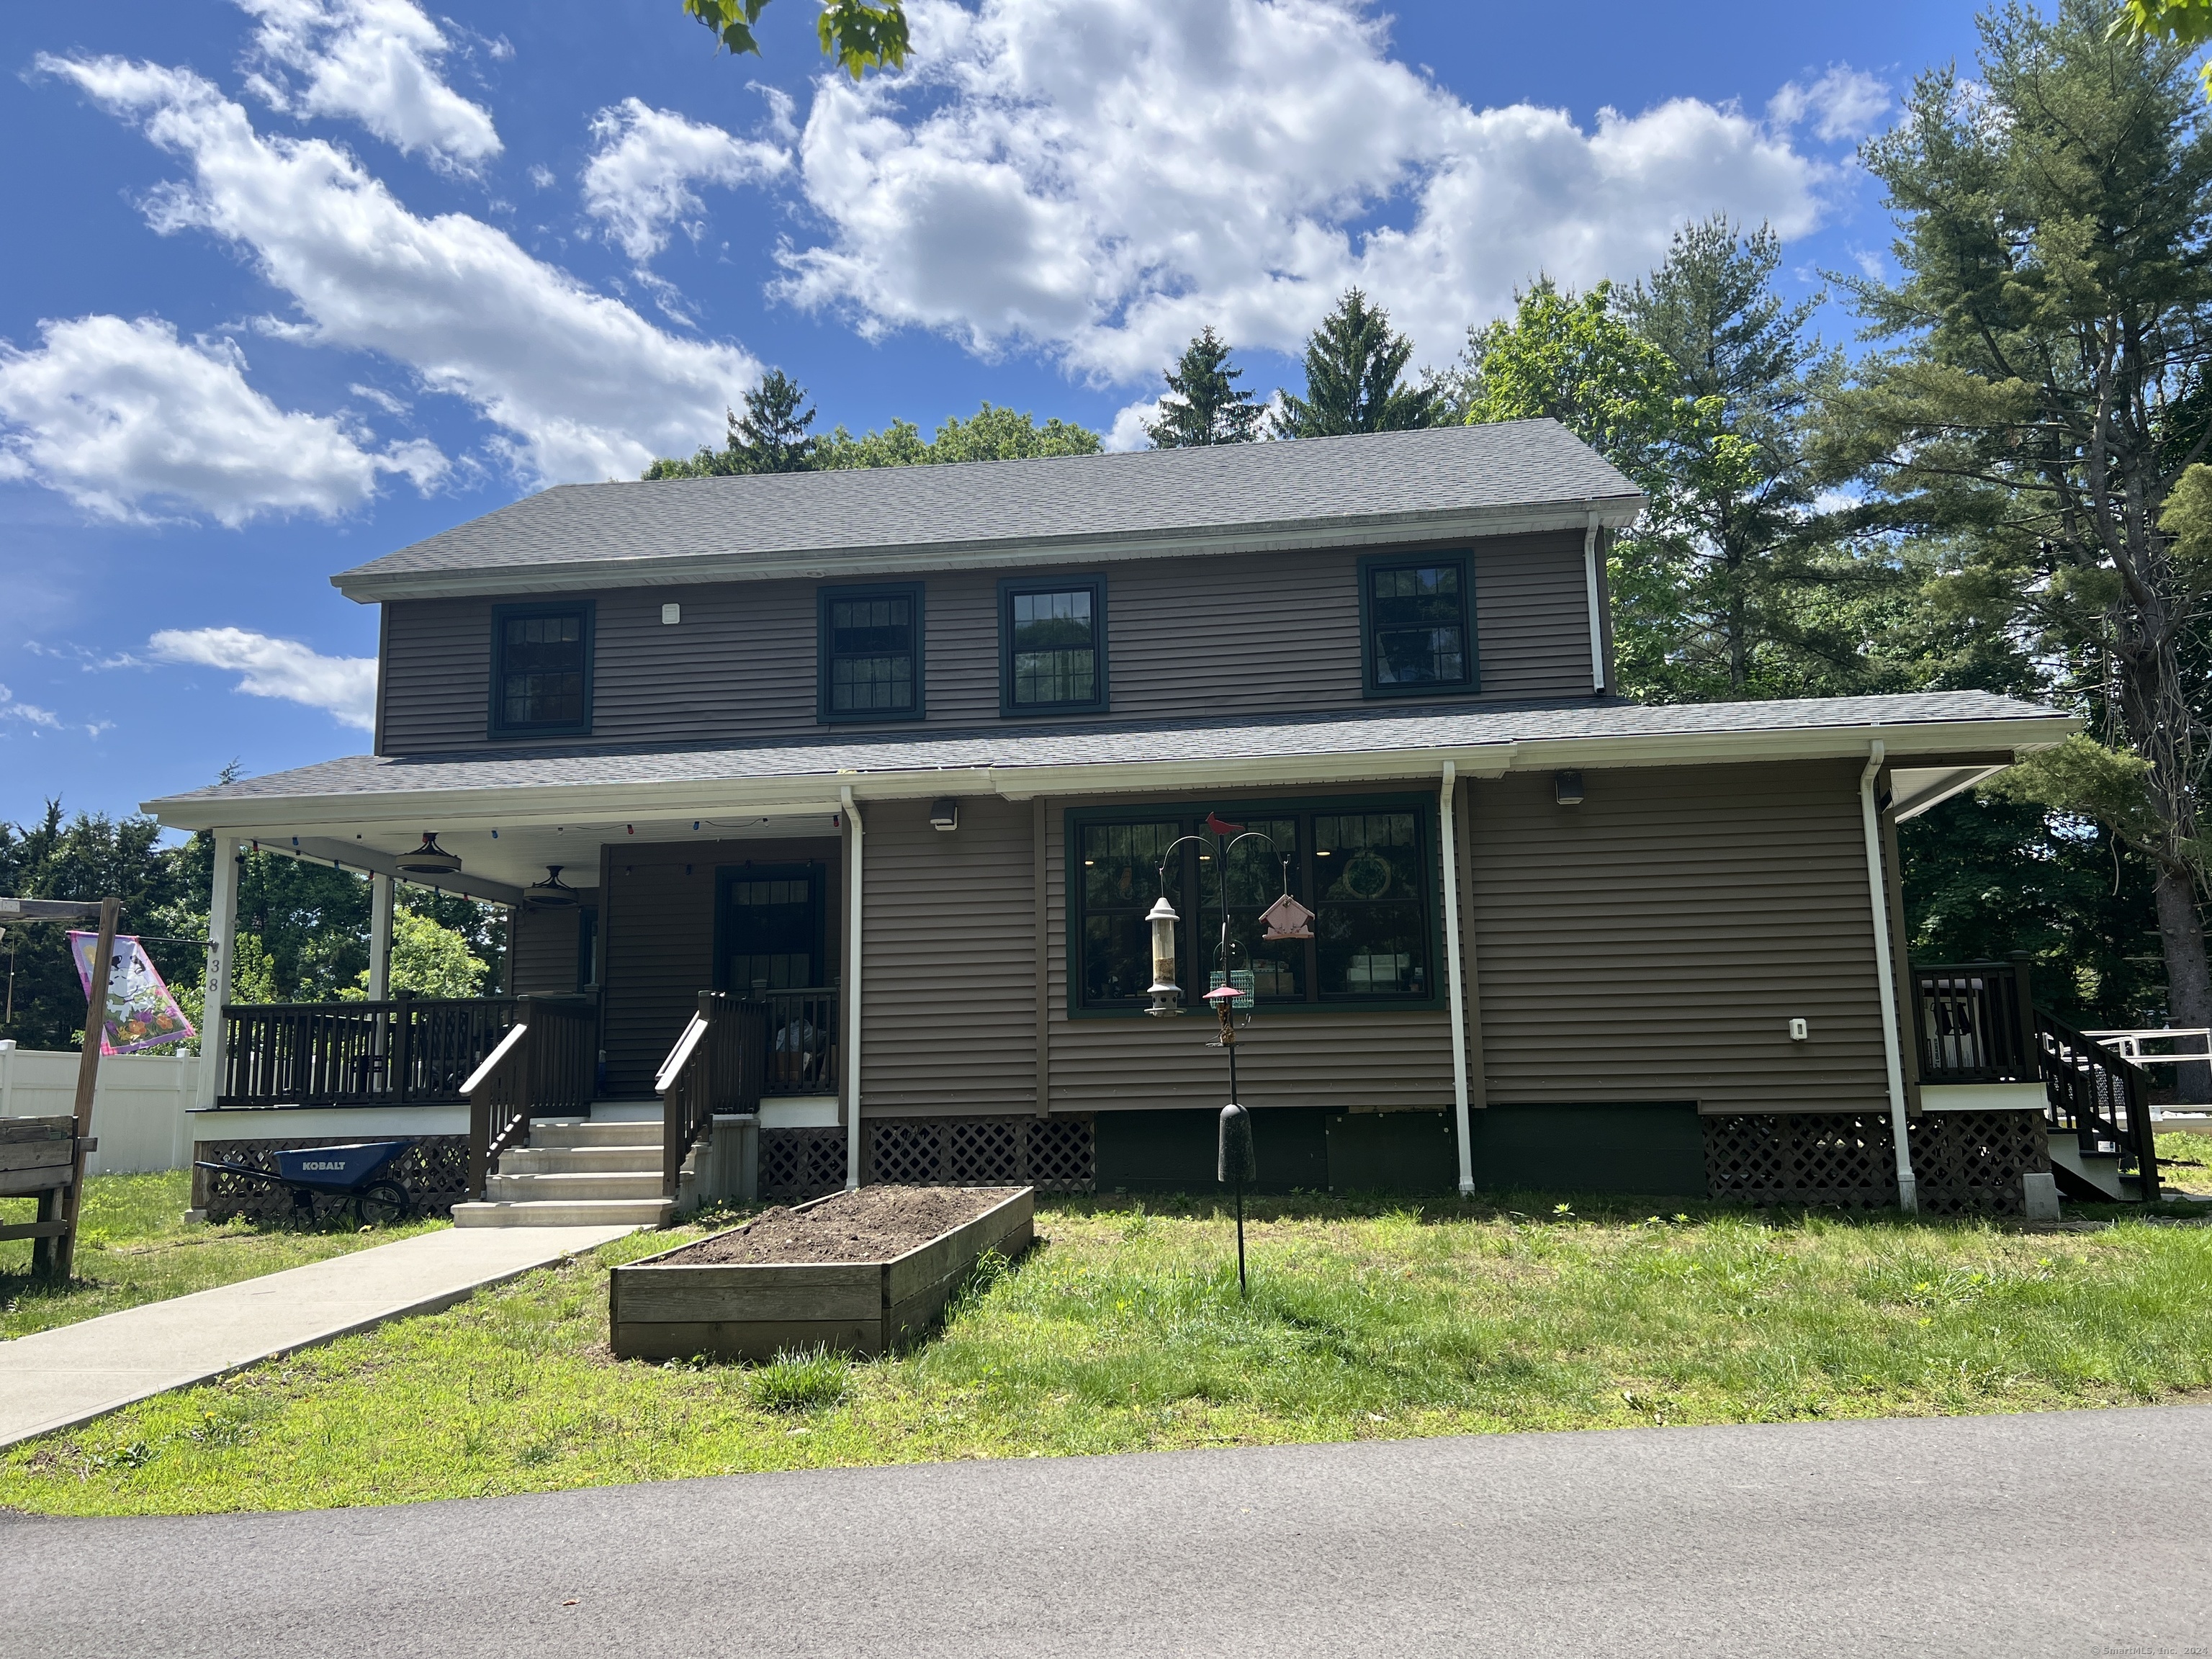 38 Williams Street, Griswold, Connecticut - 3 Bedrooms  
4.5 Bathrooms  
6 Rooms - 